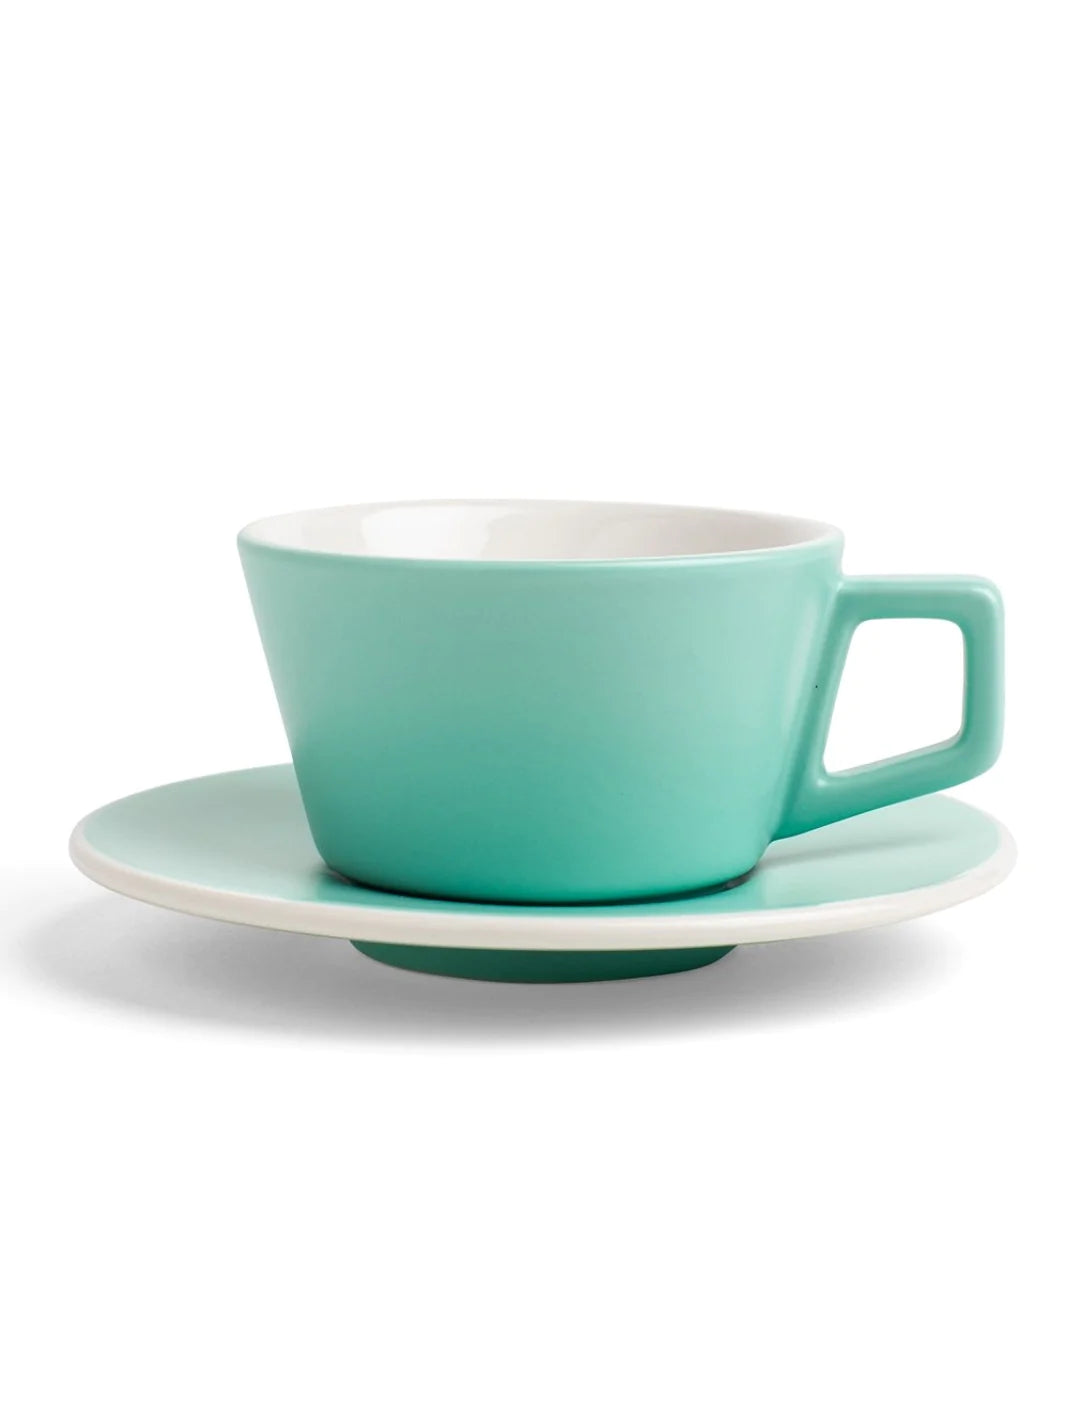 CREATED CO. Angle Cappuccino & Small Latte Saucer (Saucer Only)